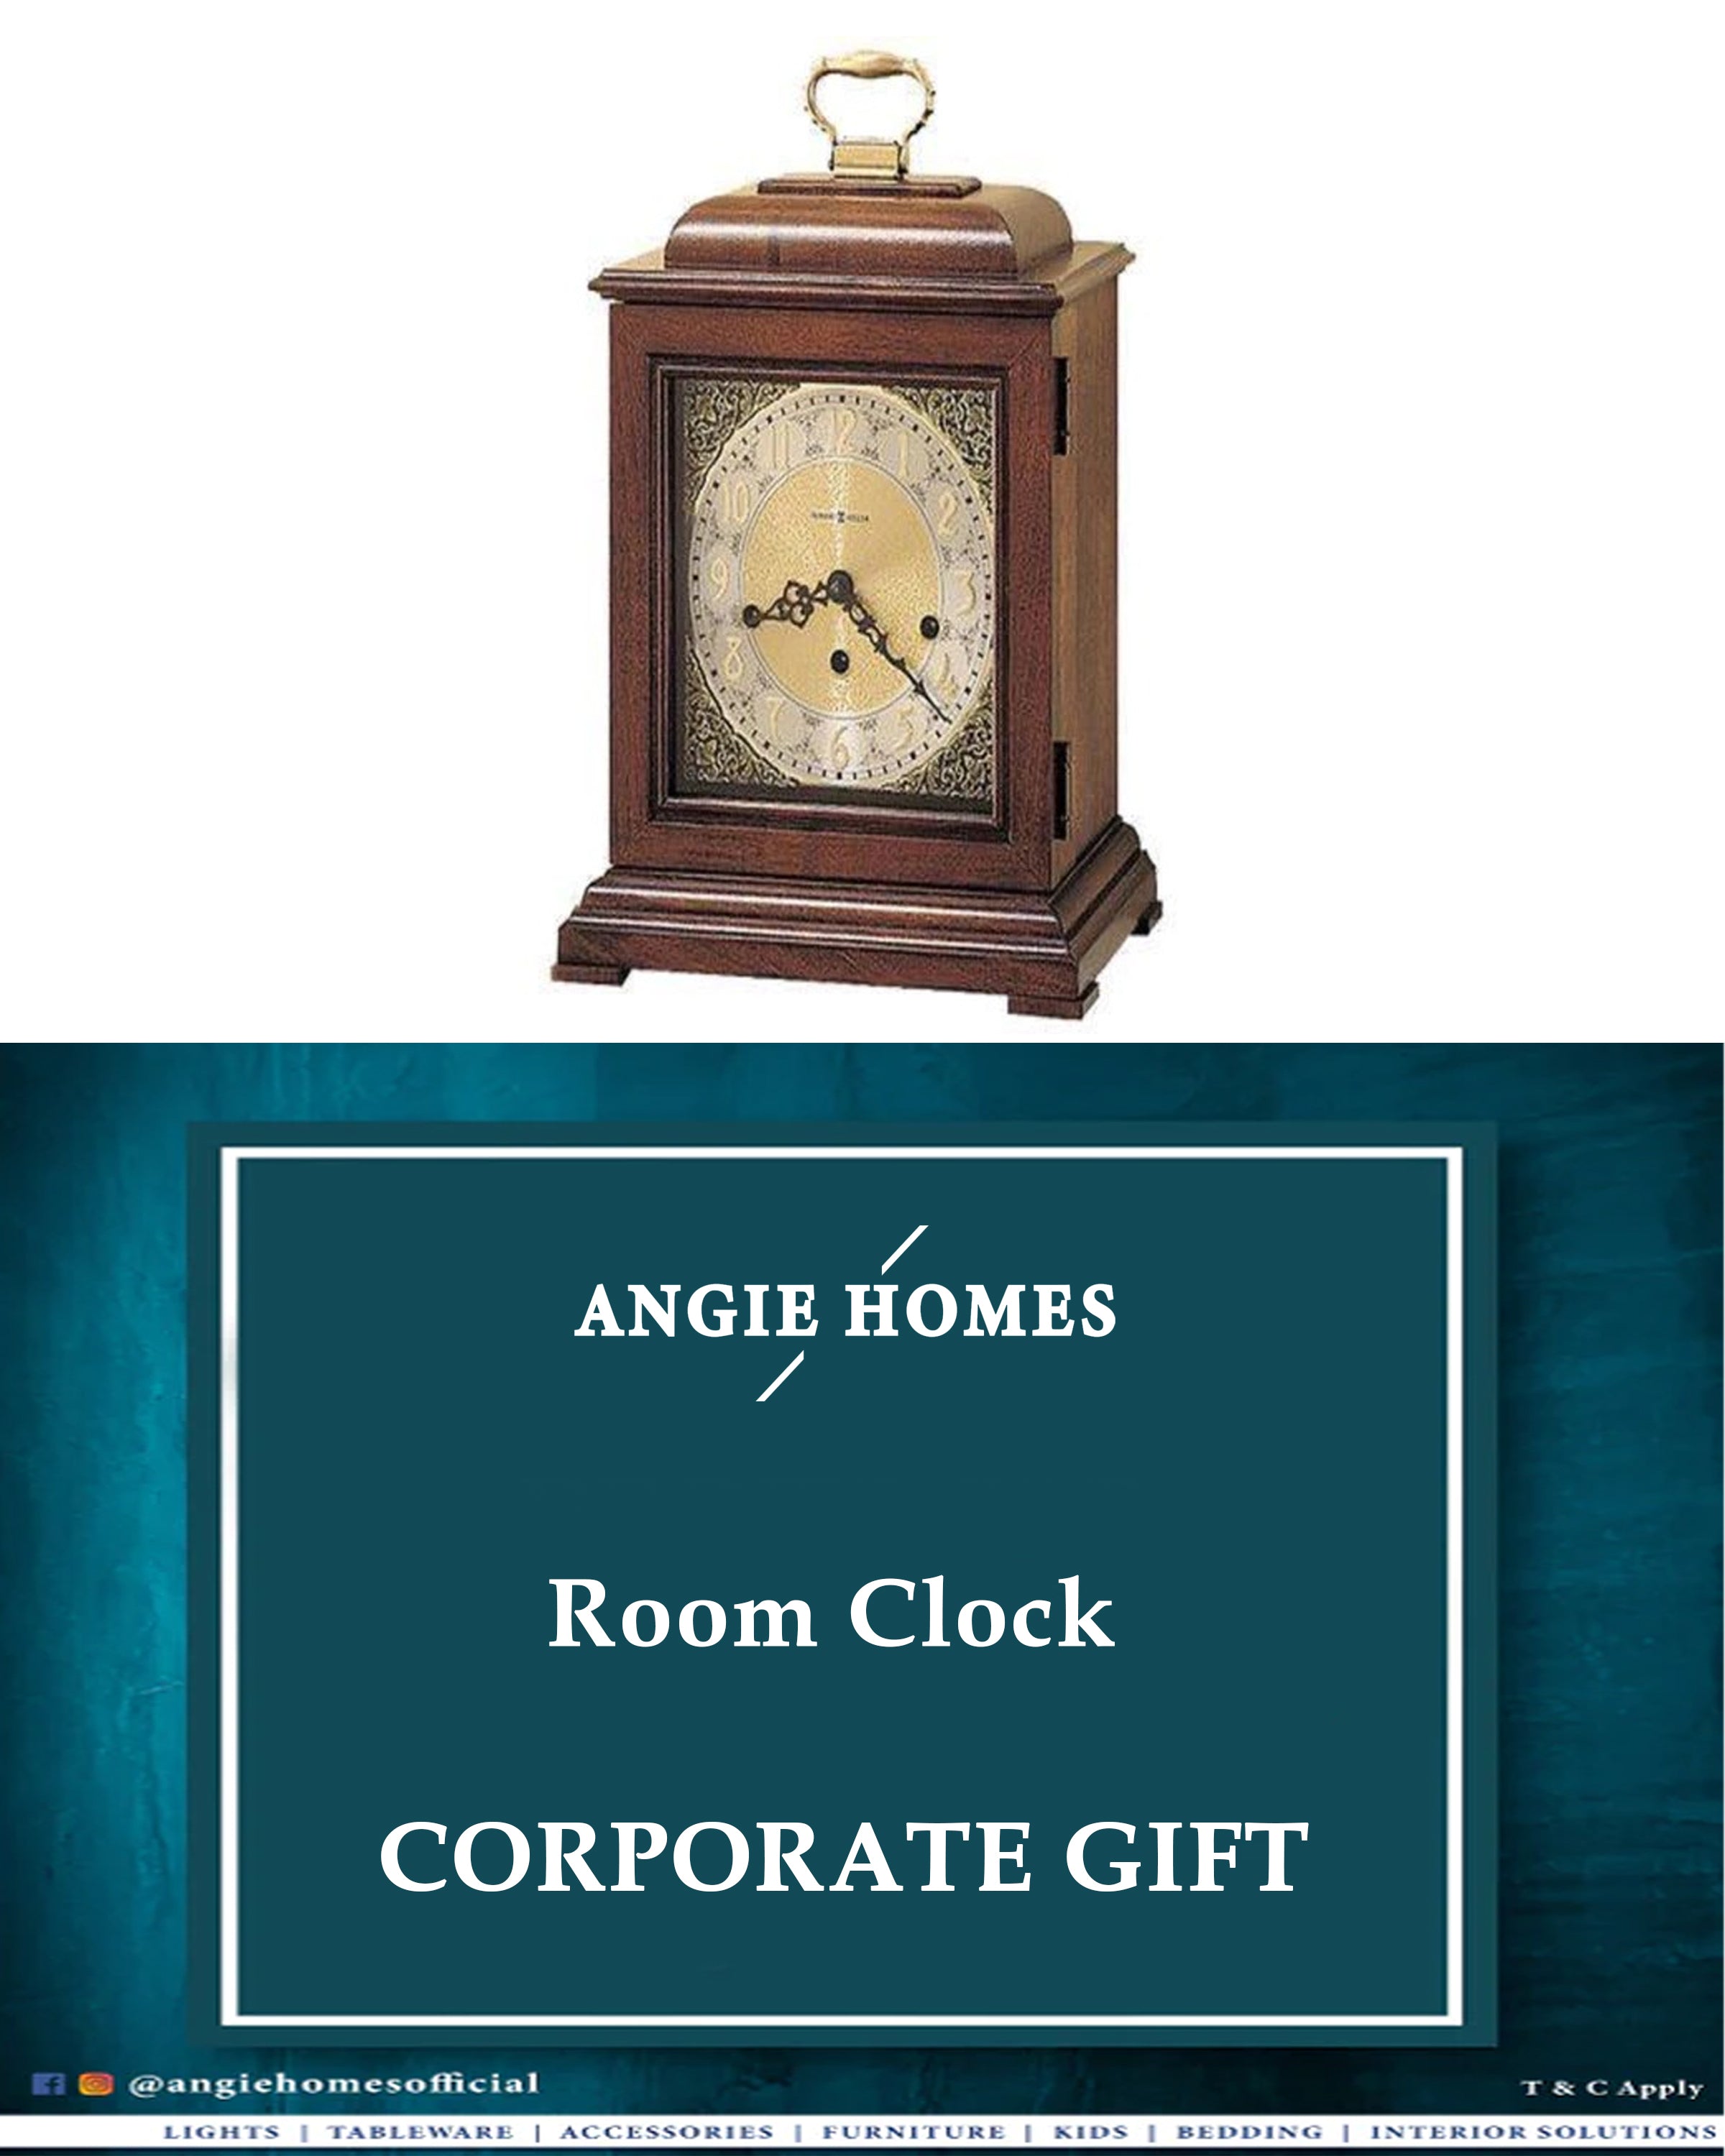 Room Clock for Wedding, House Warming & Corporate Gift ANGIE HOMES